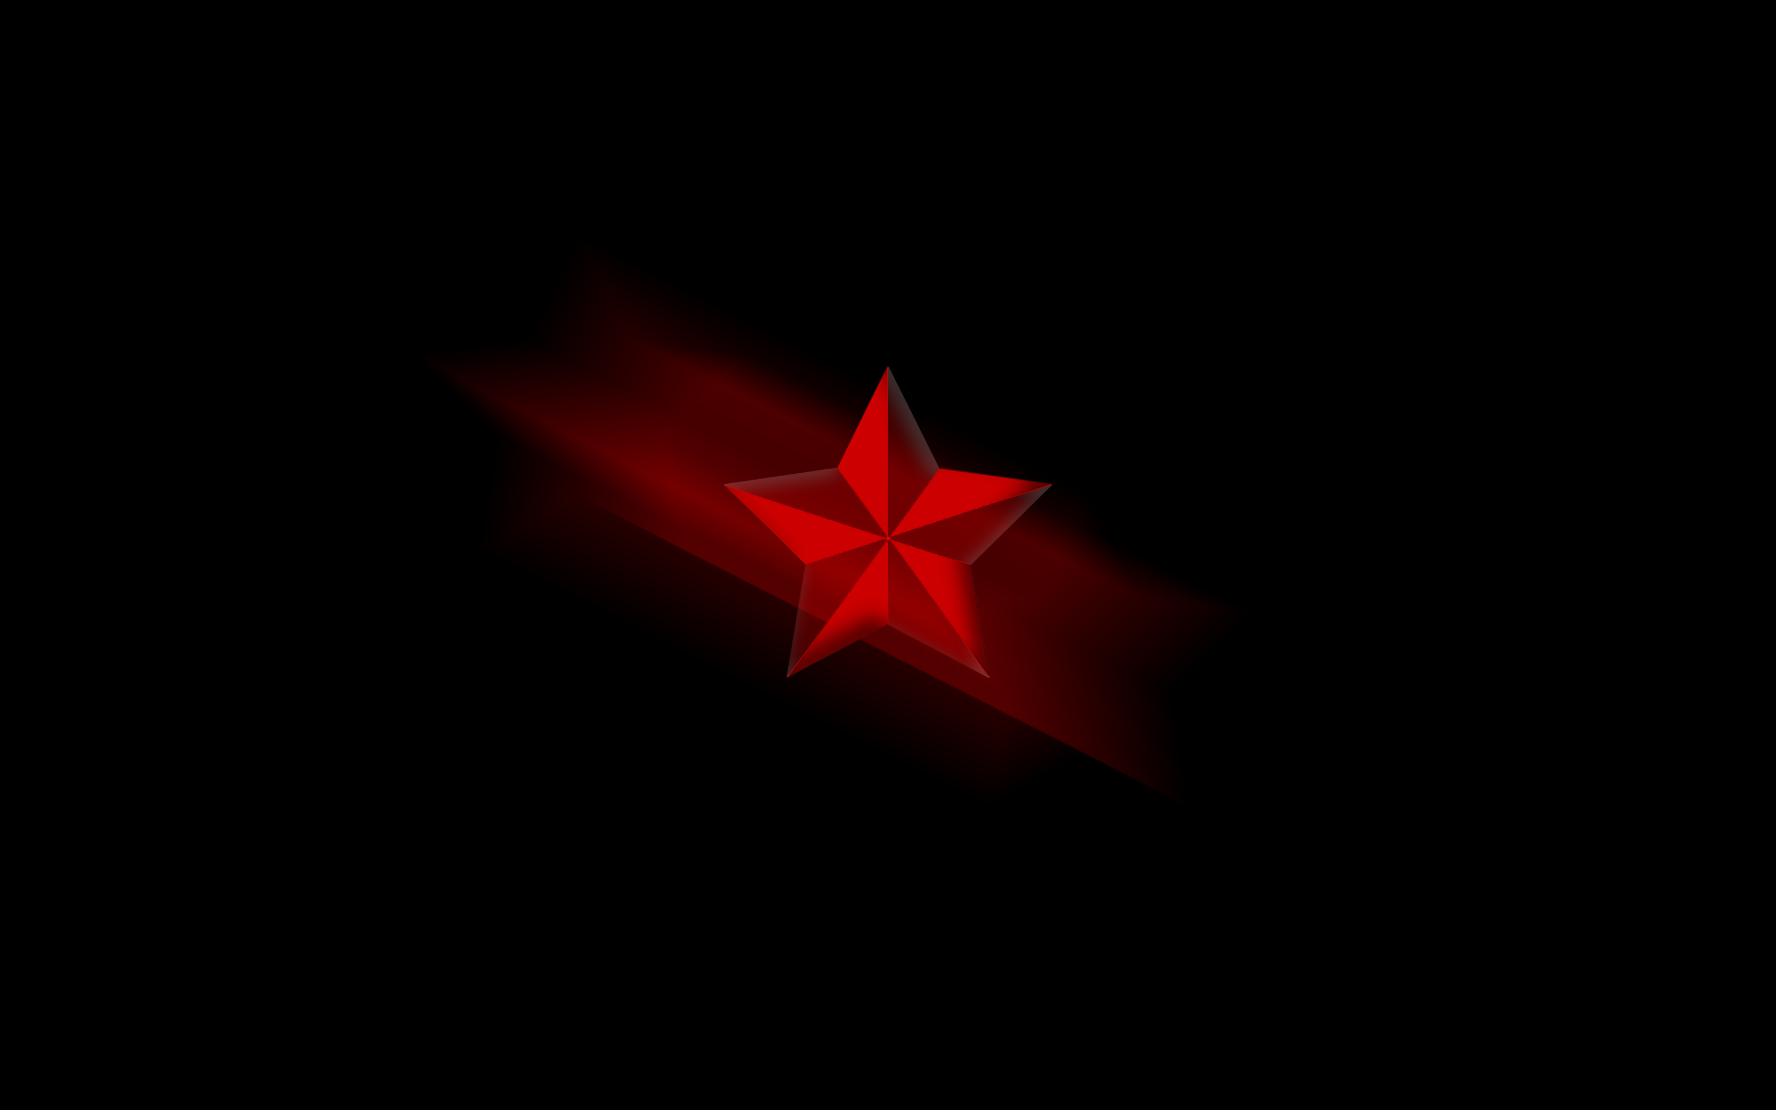 Creative collection of Red star black background Images and videos